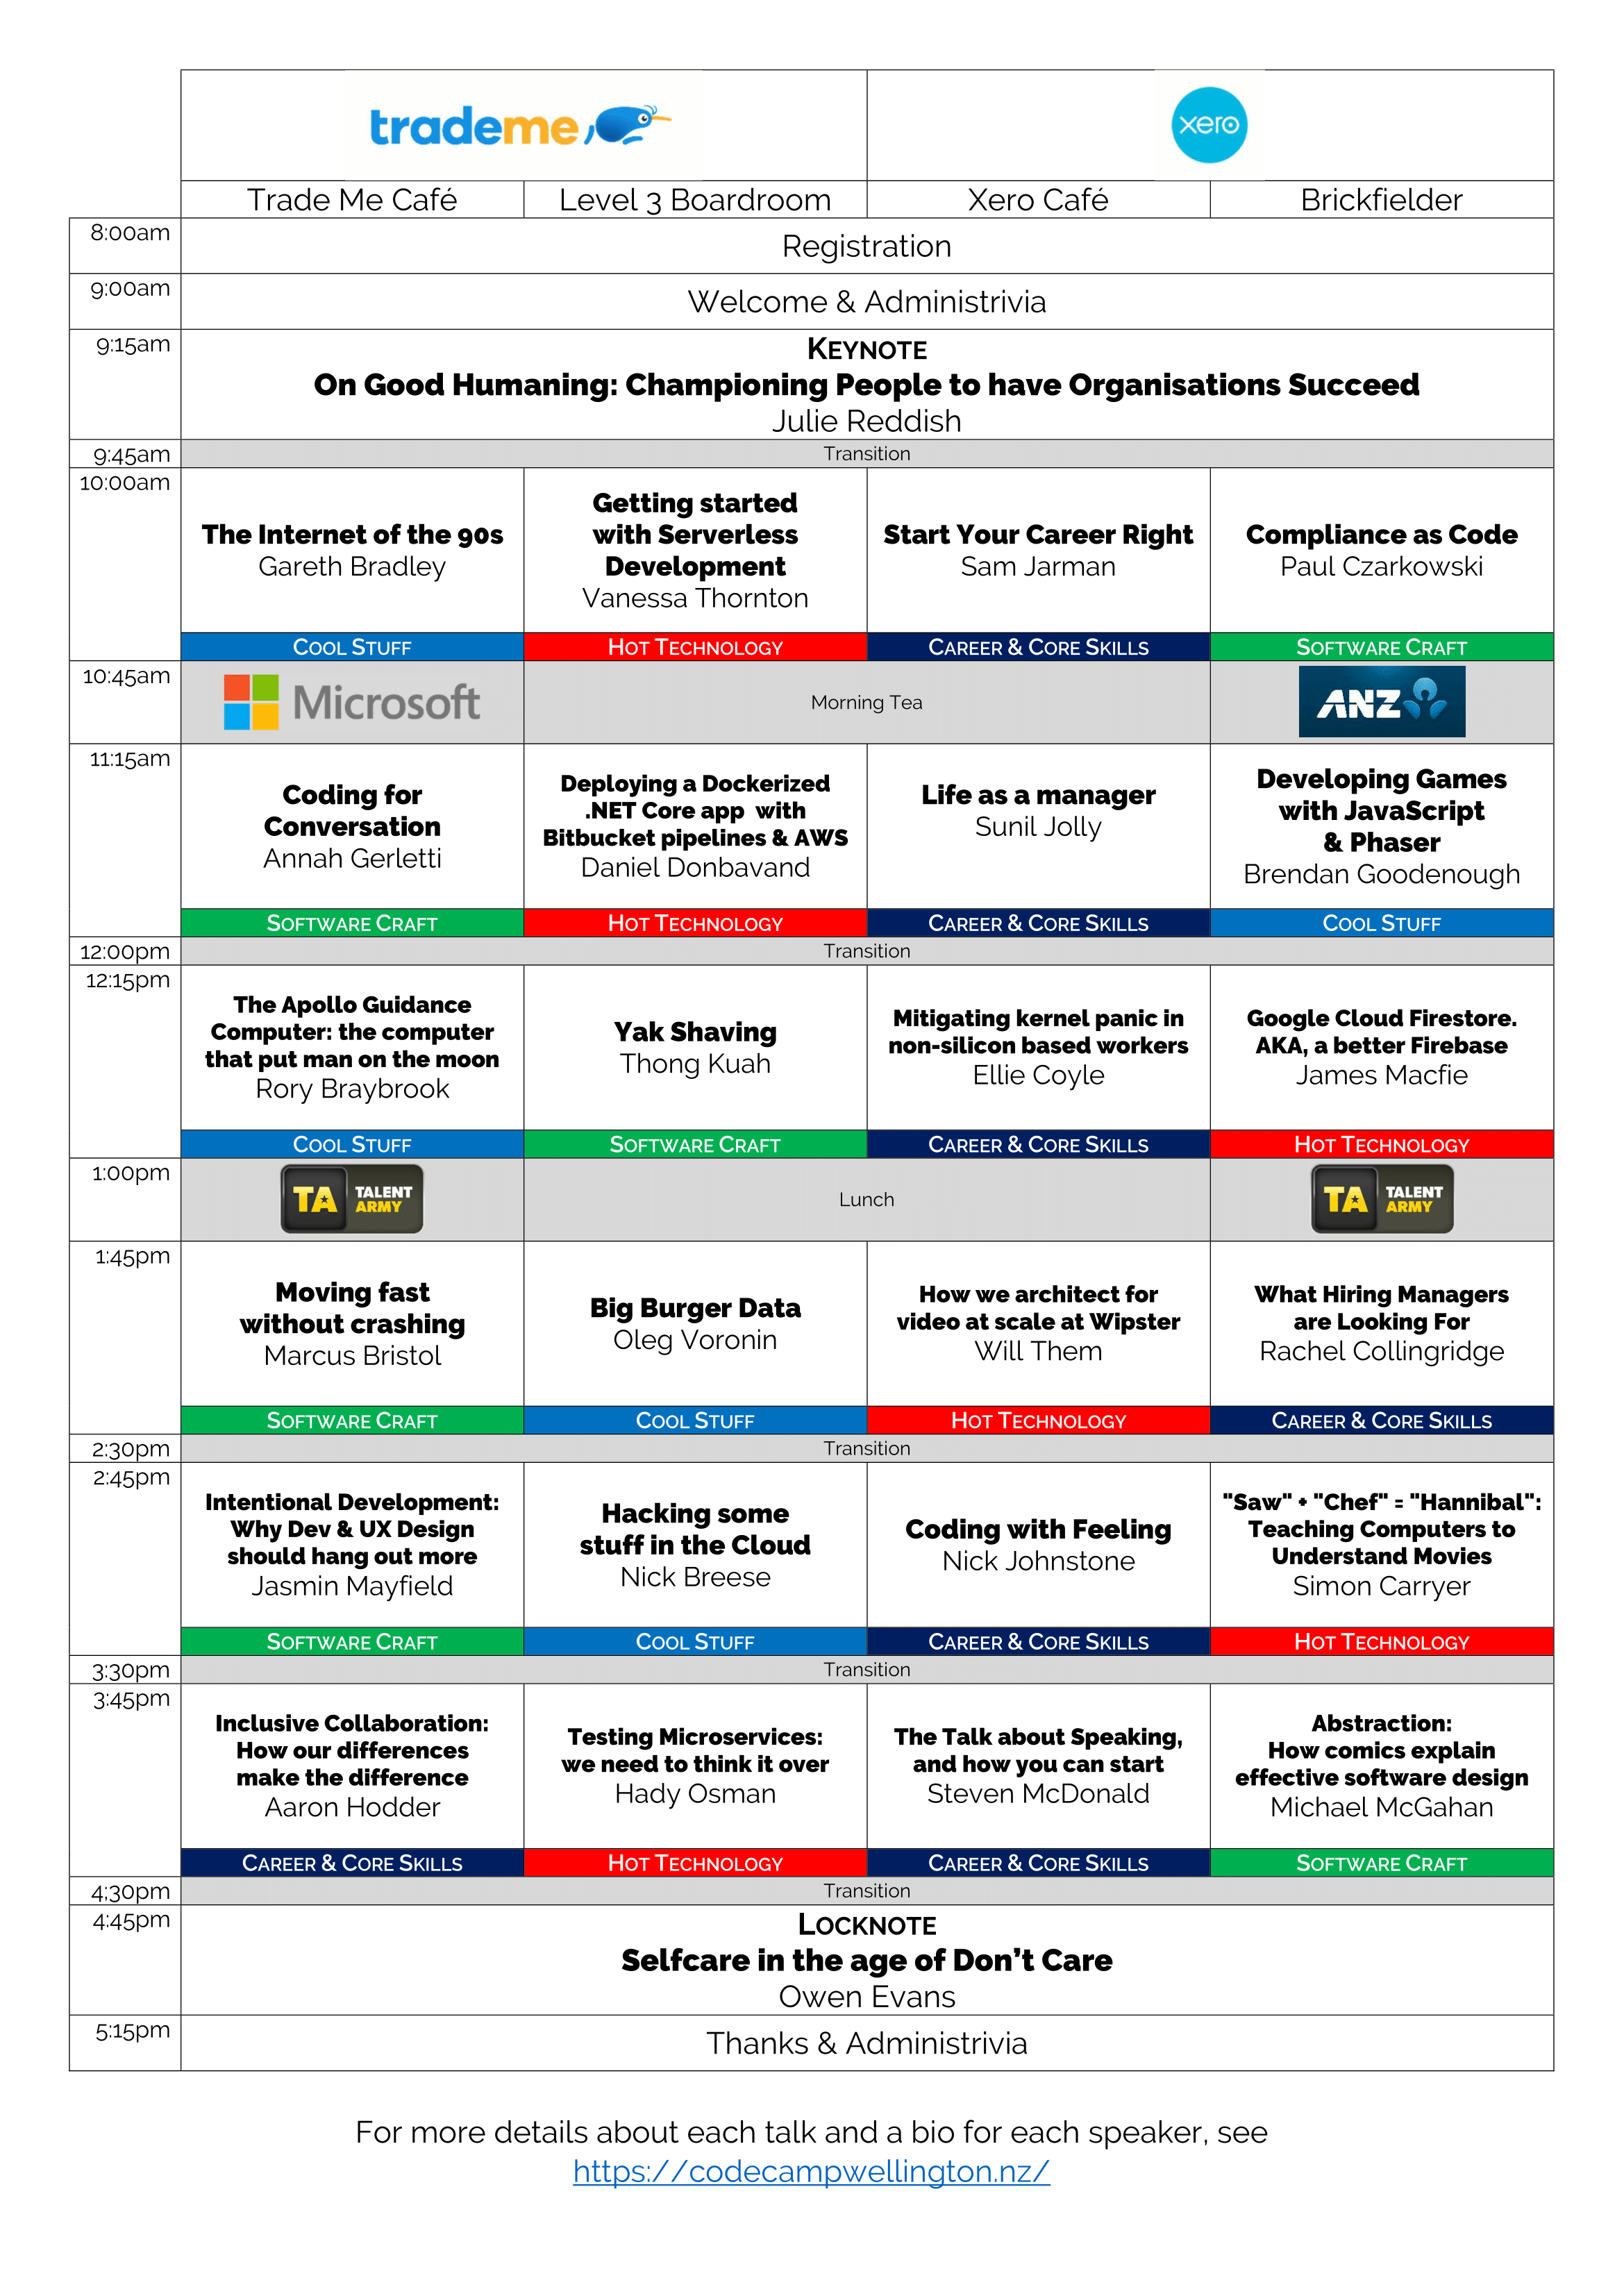 Schedule from CCW2016